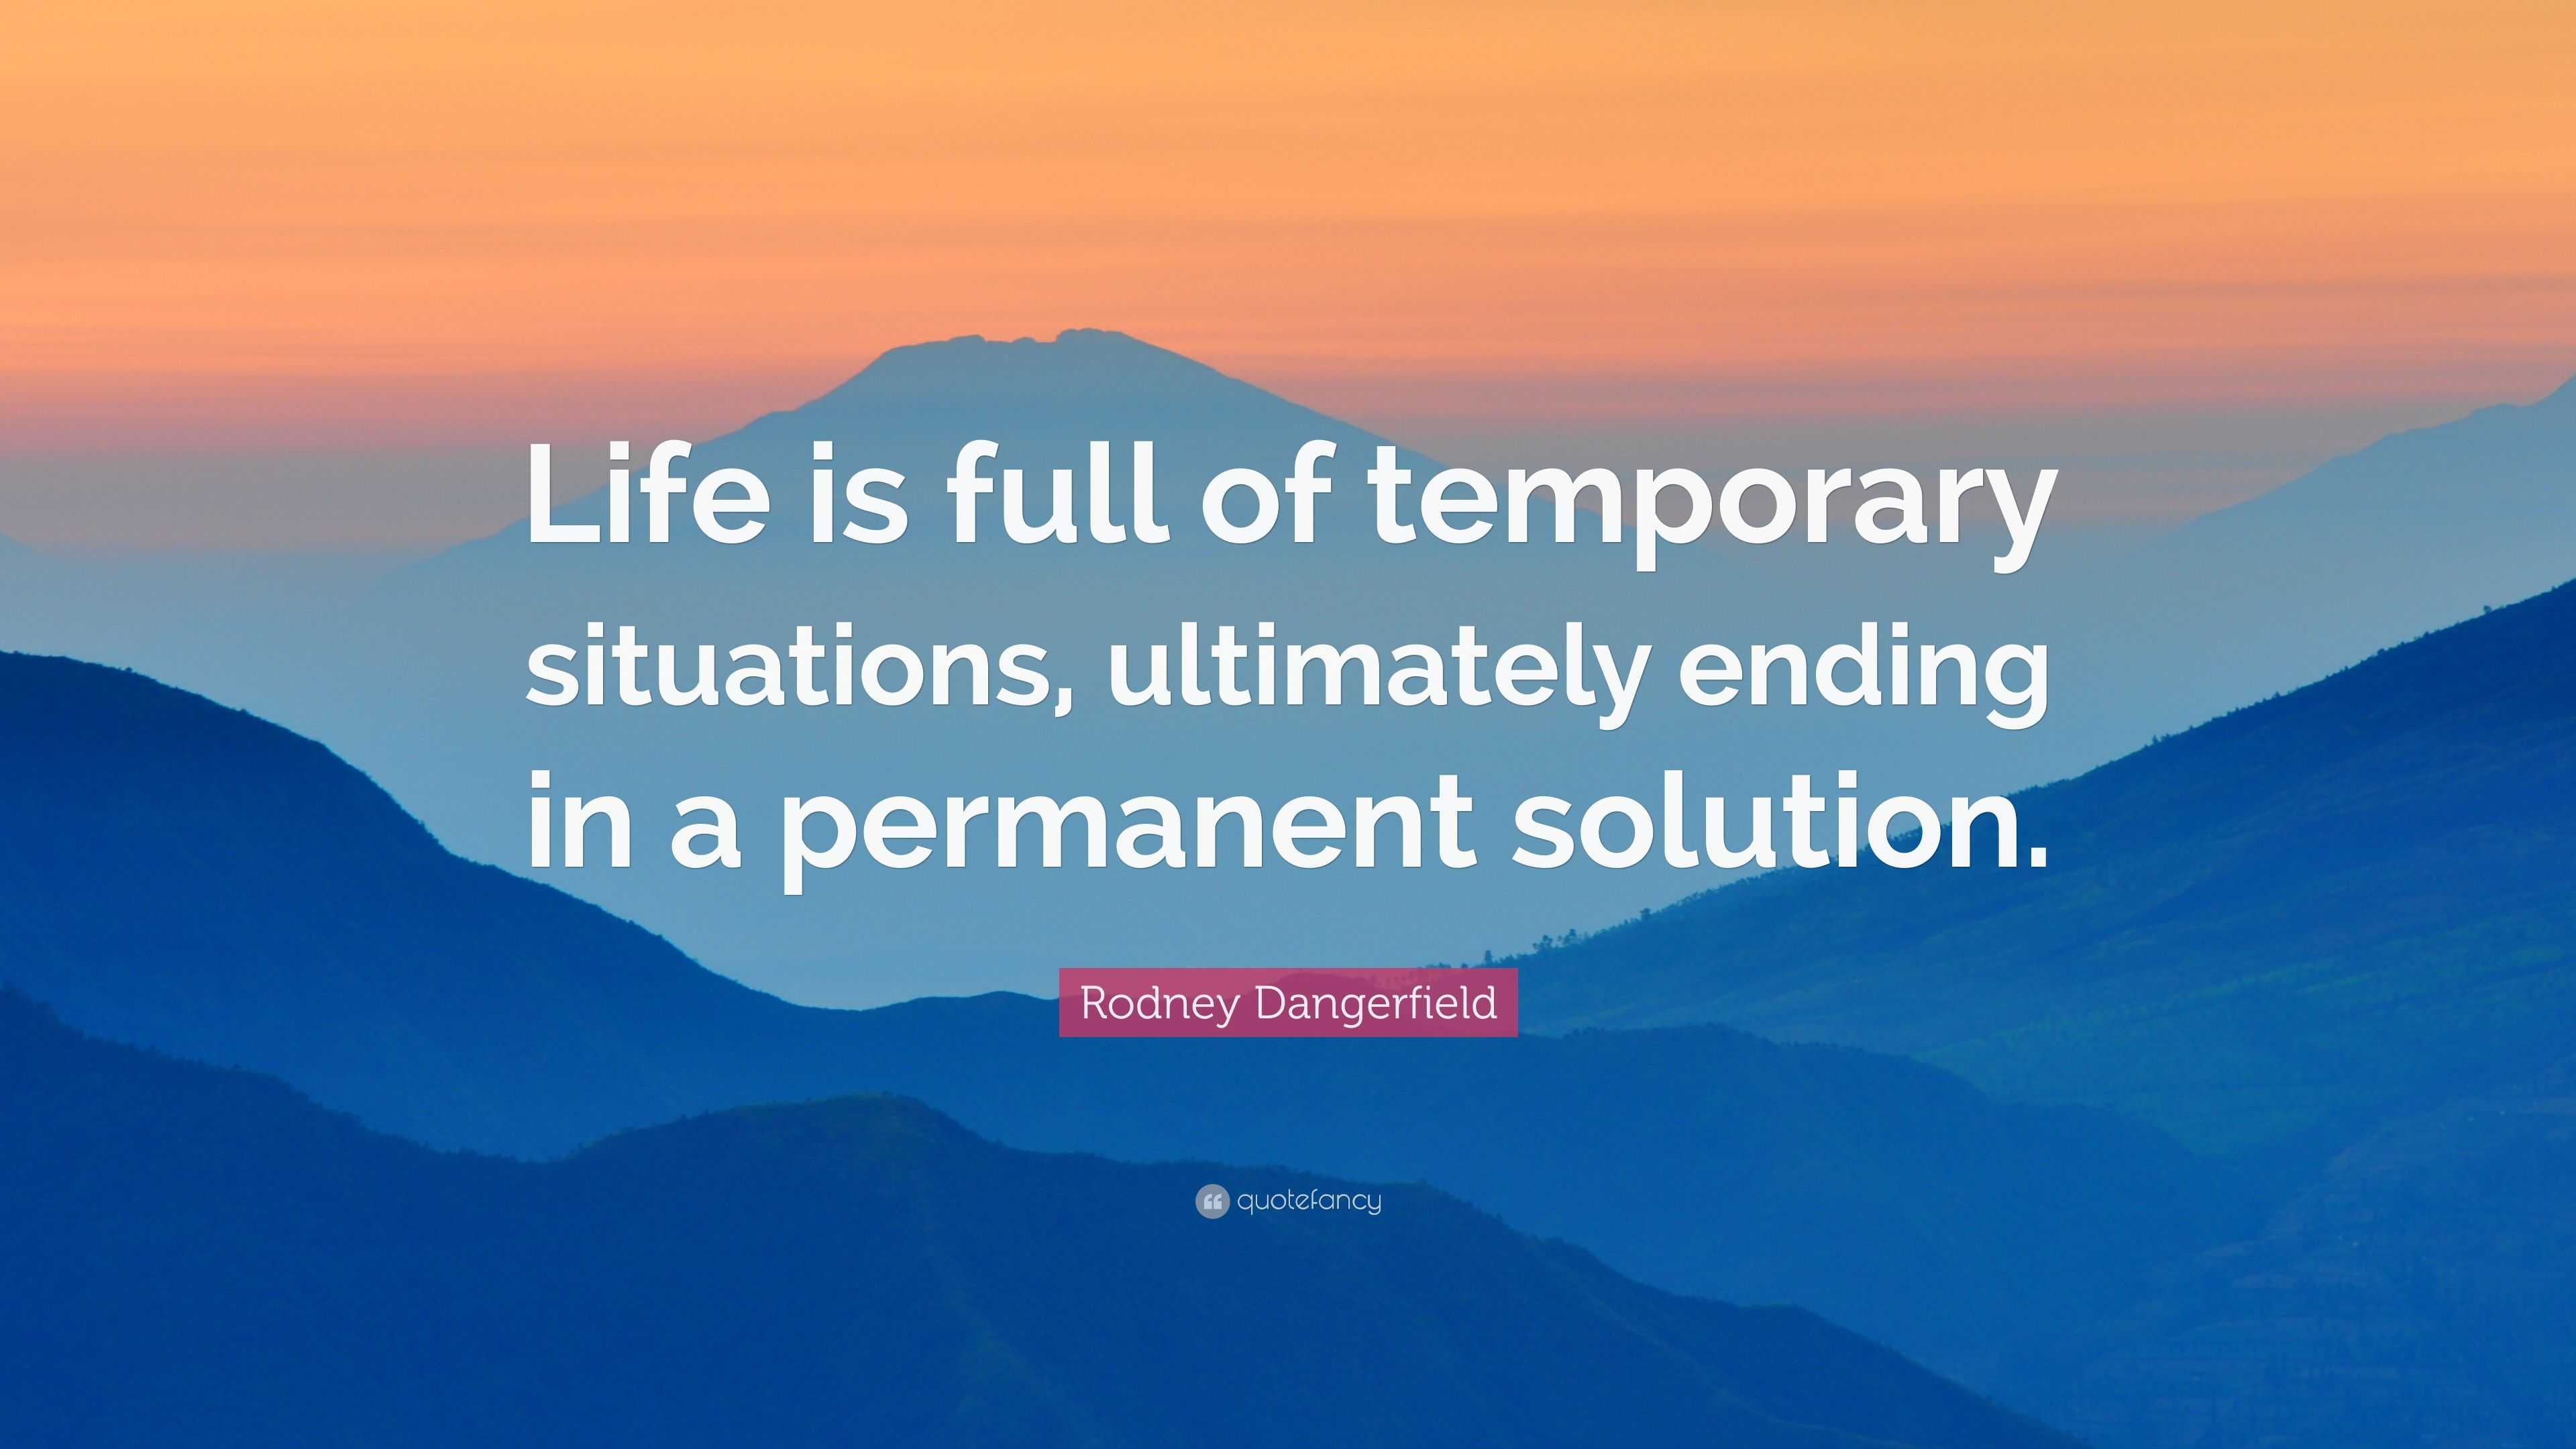 Rodney Dangerfield Quote: “Life is full of temporary situations ...